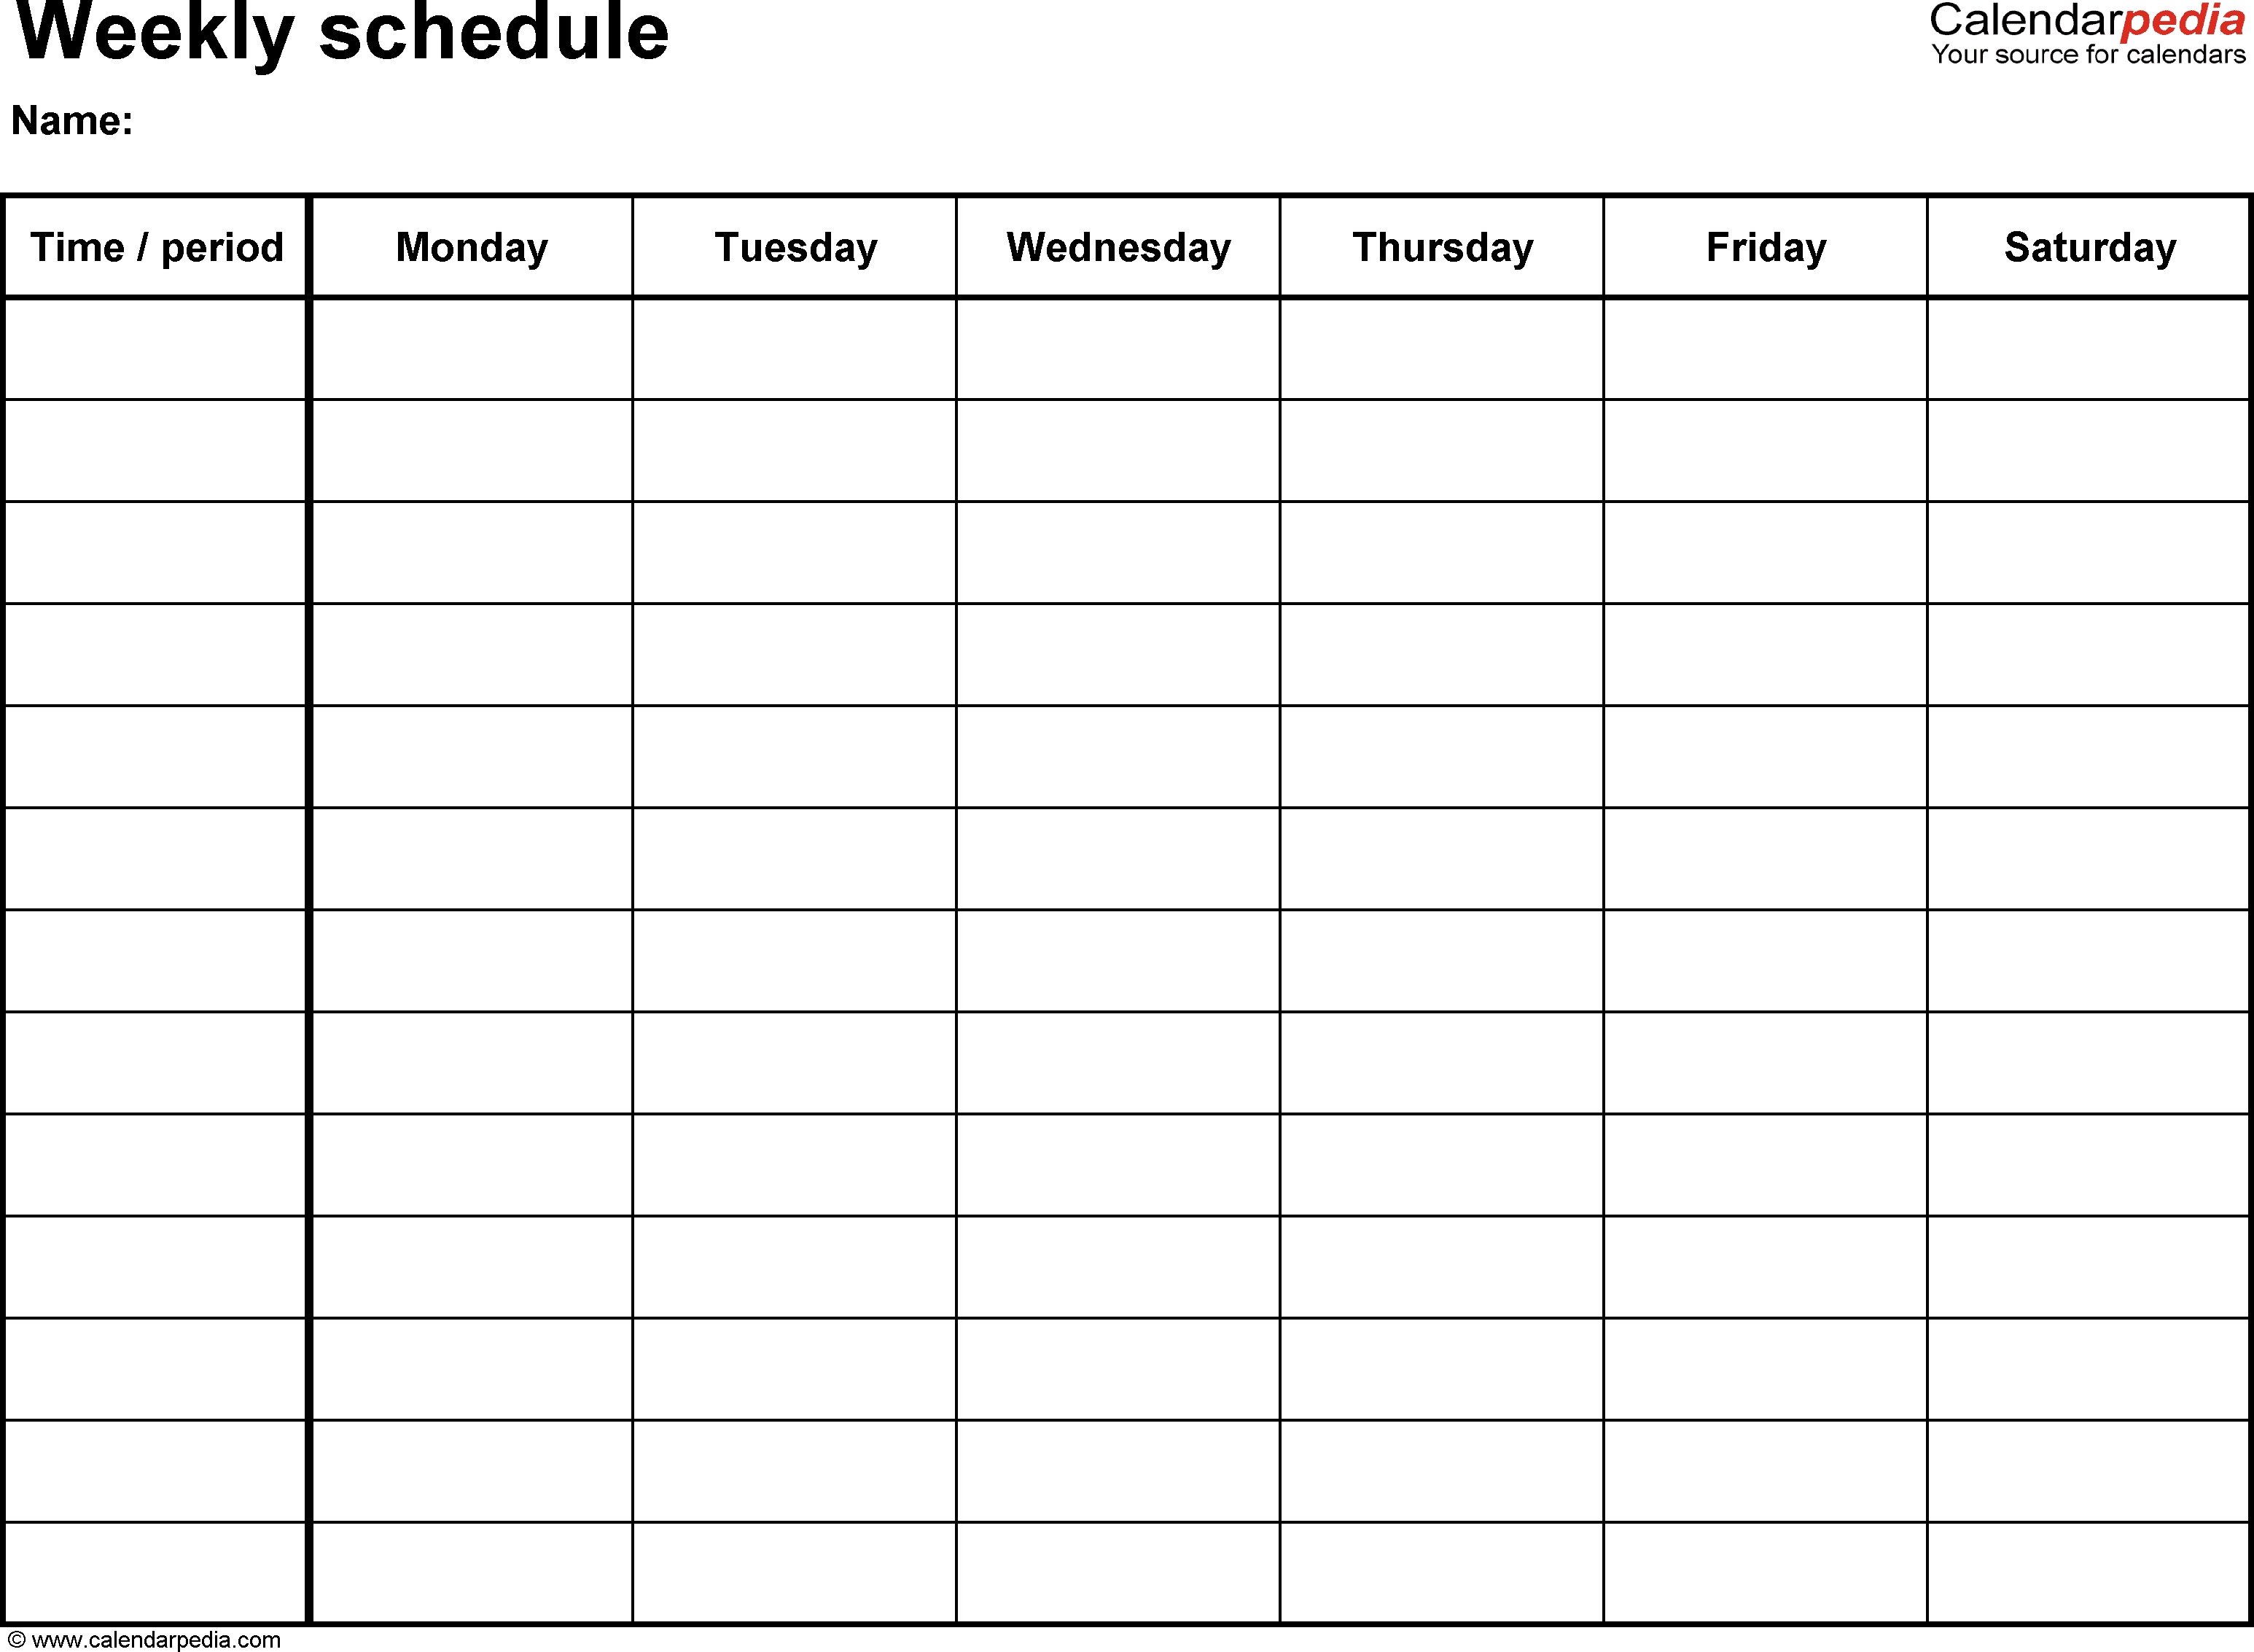 Free Weekly Schedule Templates For Word - 18 Templates Free Printable 2 Week Calendar Template